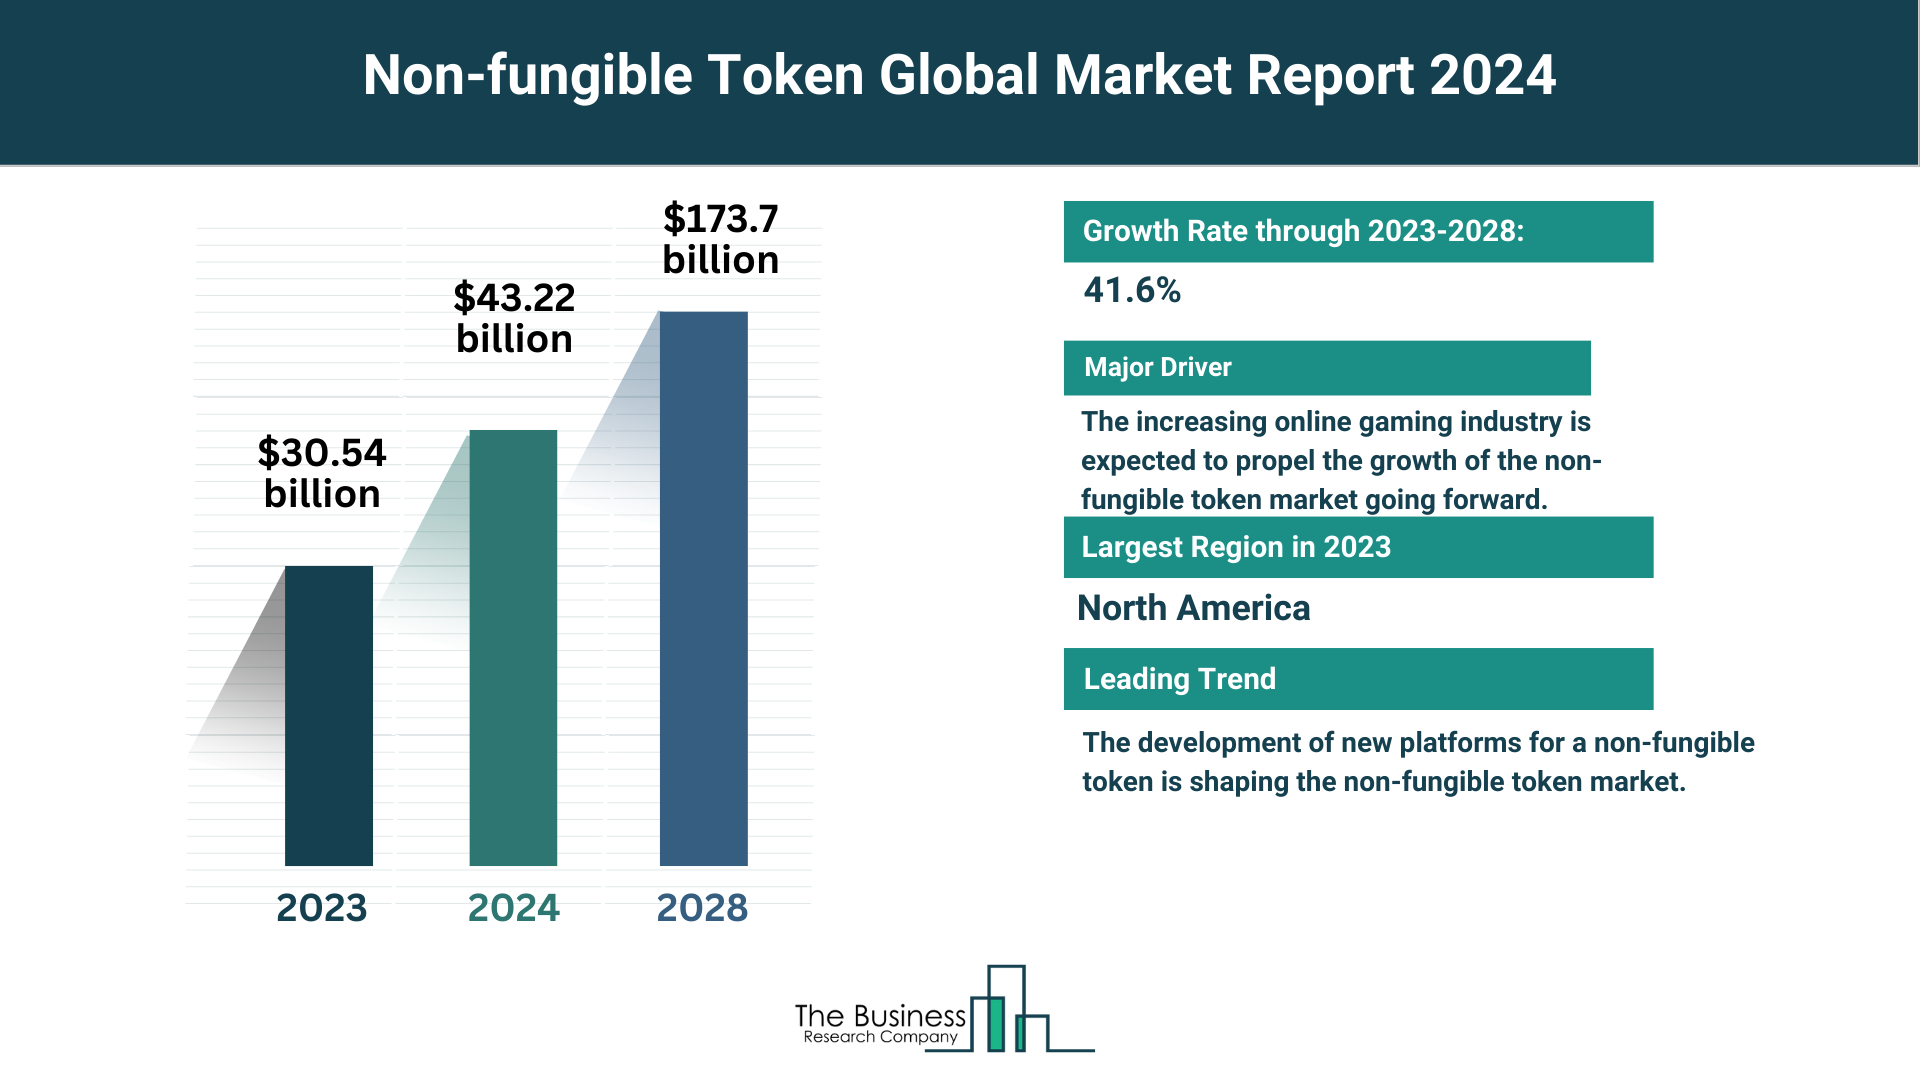 5 Major Insights On The Non-fungible Token Market 2024